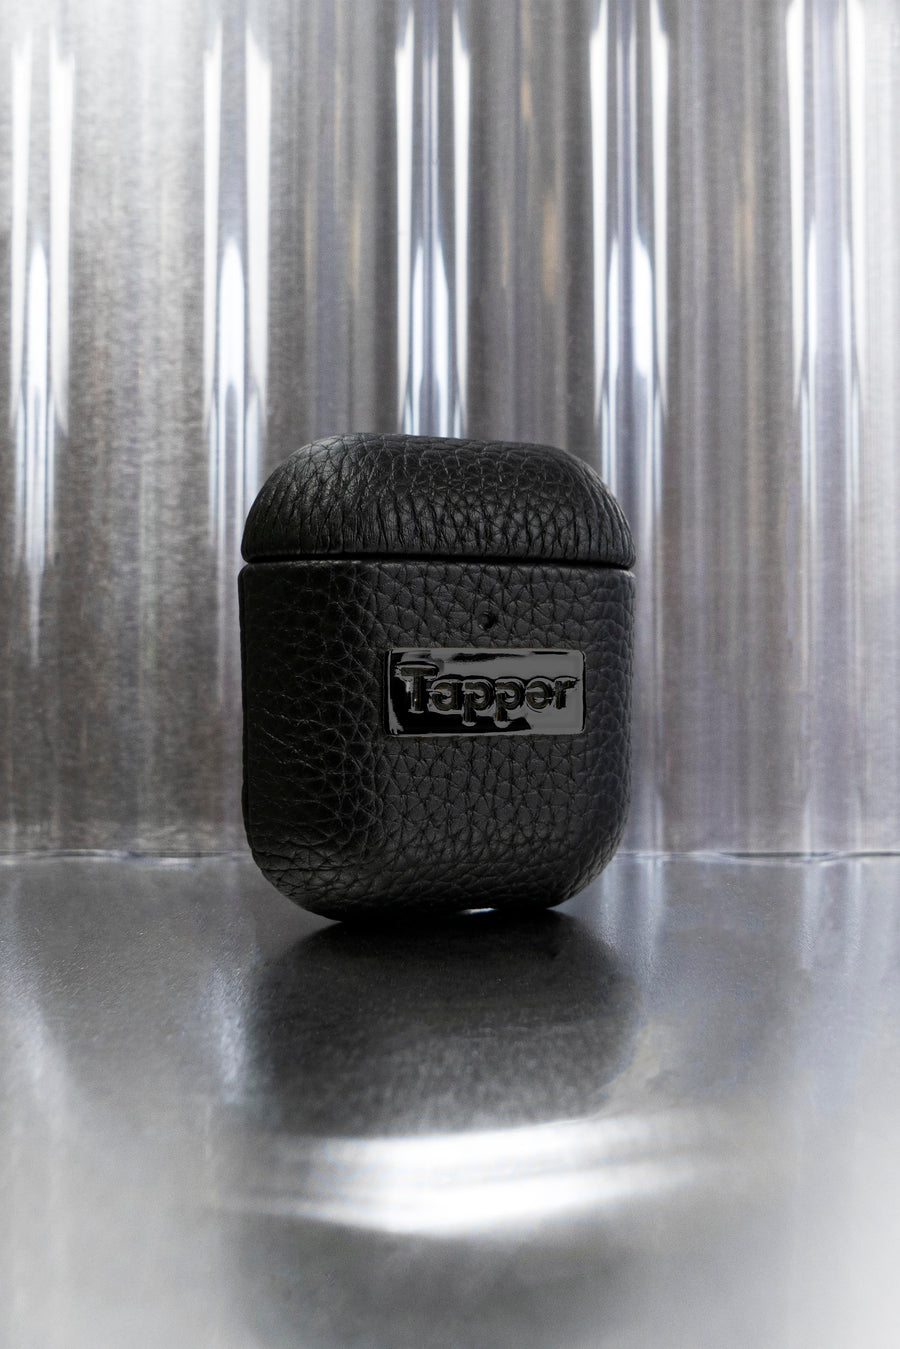 Tapper's luxurious black genuine cow leather AirPods case protects and elevates the look of your AirPods. The luxurious, protective case for AirPods with a metal logo plate in hematite black plating steps up your AirPods game. The next must-have high end protective Apple AirPods accessory in real leather and precious metals. Compatible with AirPods (1st and 2nd generation). Designed in Sweden by Tapper. Free Express Shipping at gettapper.com